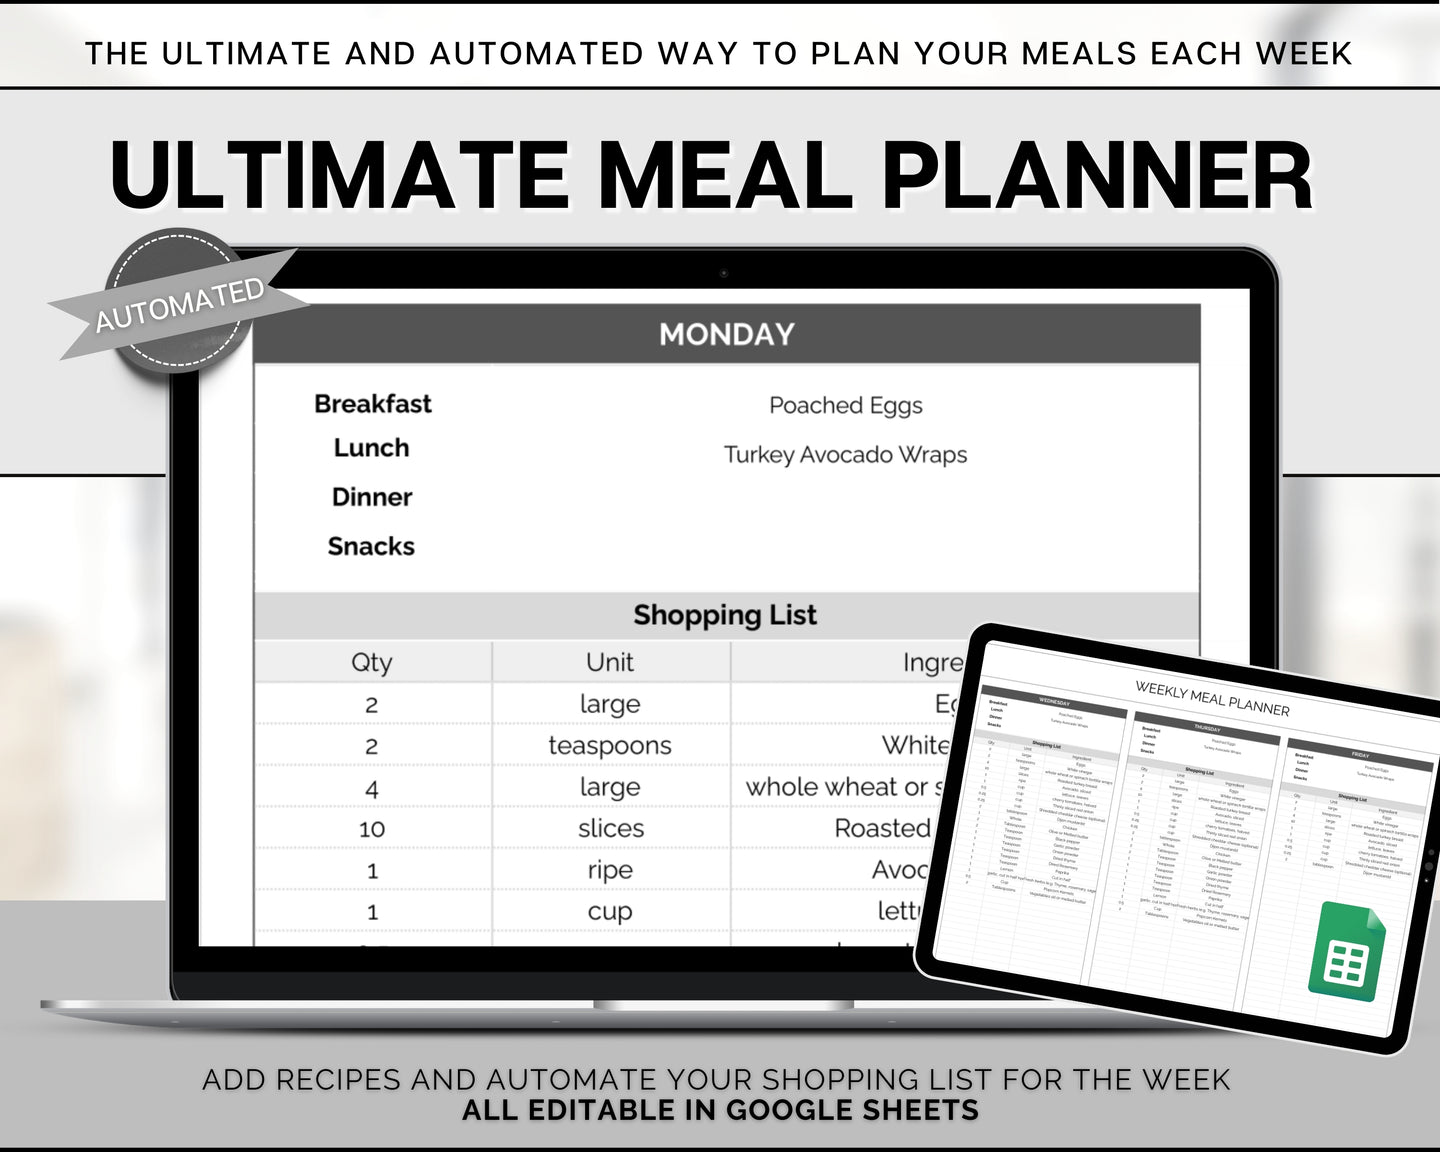 Ultimate Meal Planner Spreadsheet | Perfect Recipe Template with AUTOMATED Grocery List, Family Meal Prep, Weekly Meal Plan & Shopping List | Google Sheets | Mono